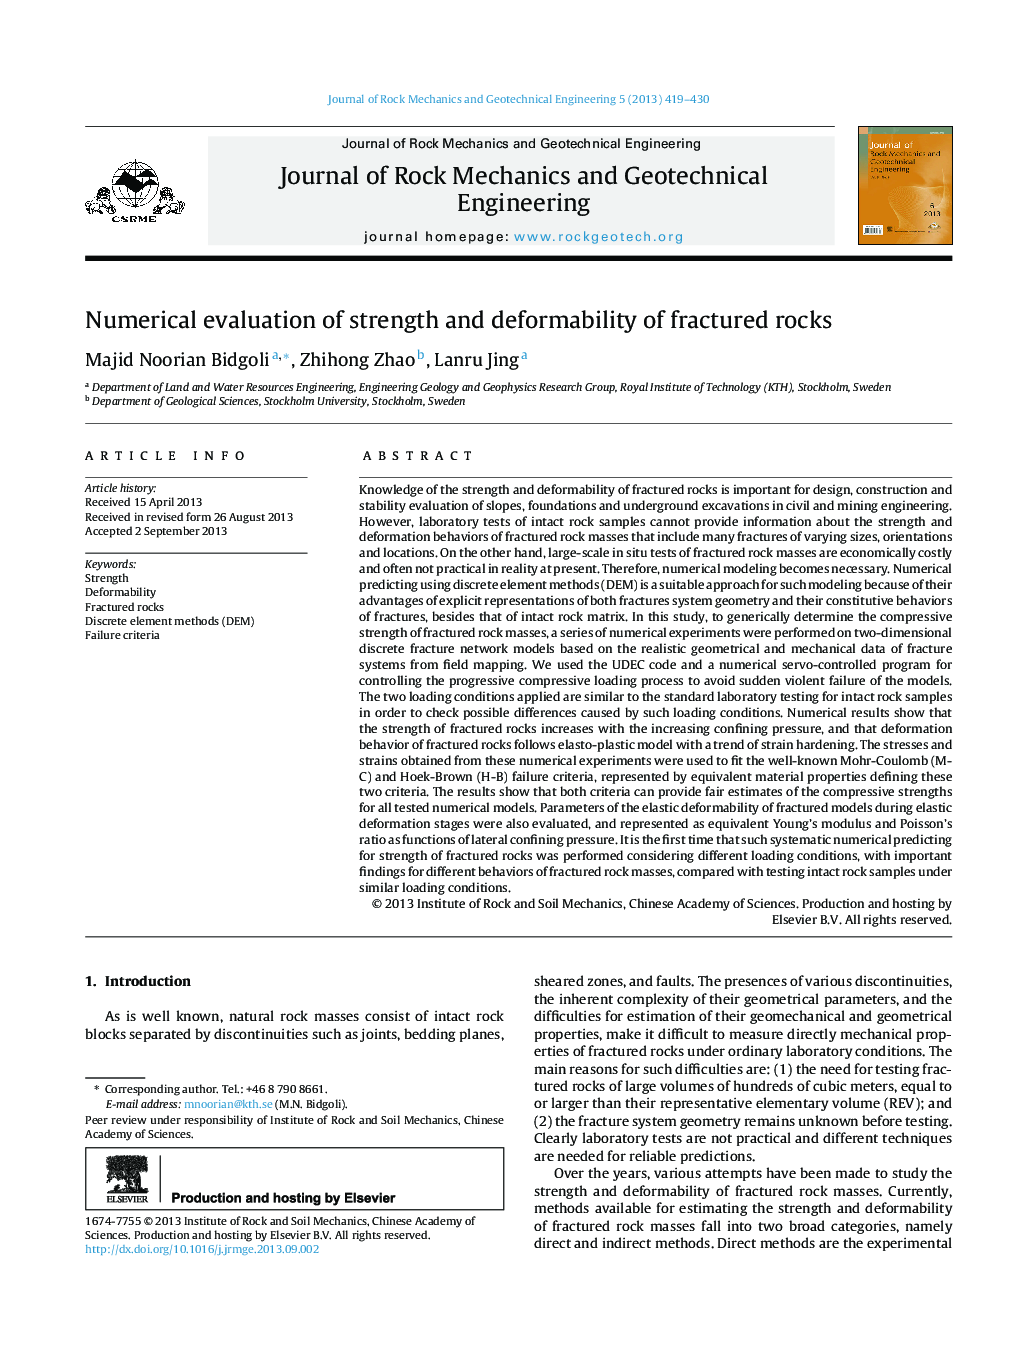 Numerical evaluation of strength and deformability of fractured rocks 